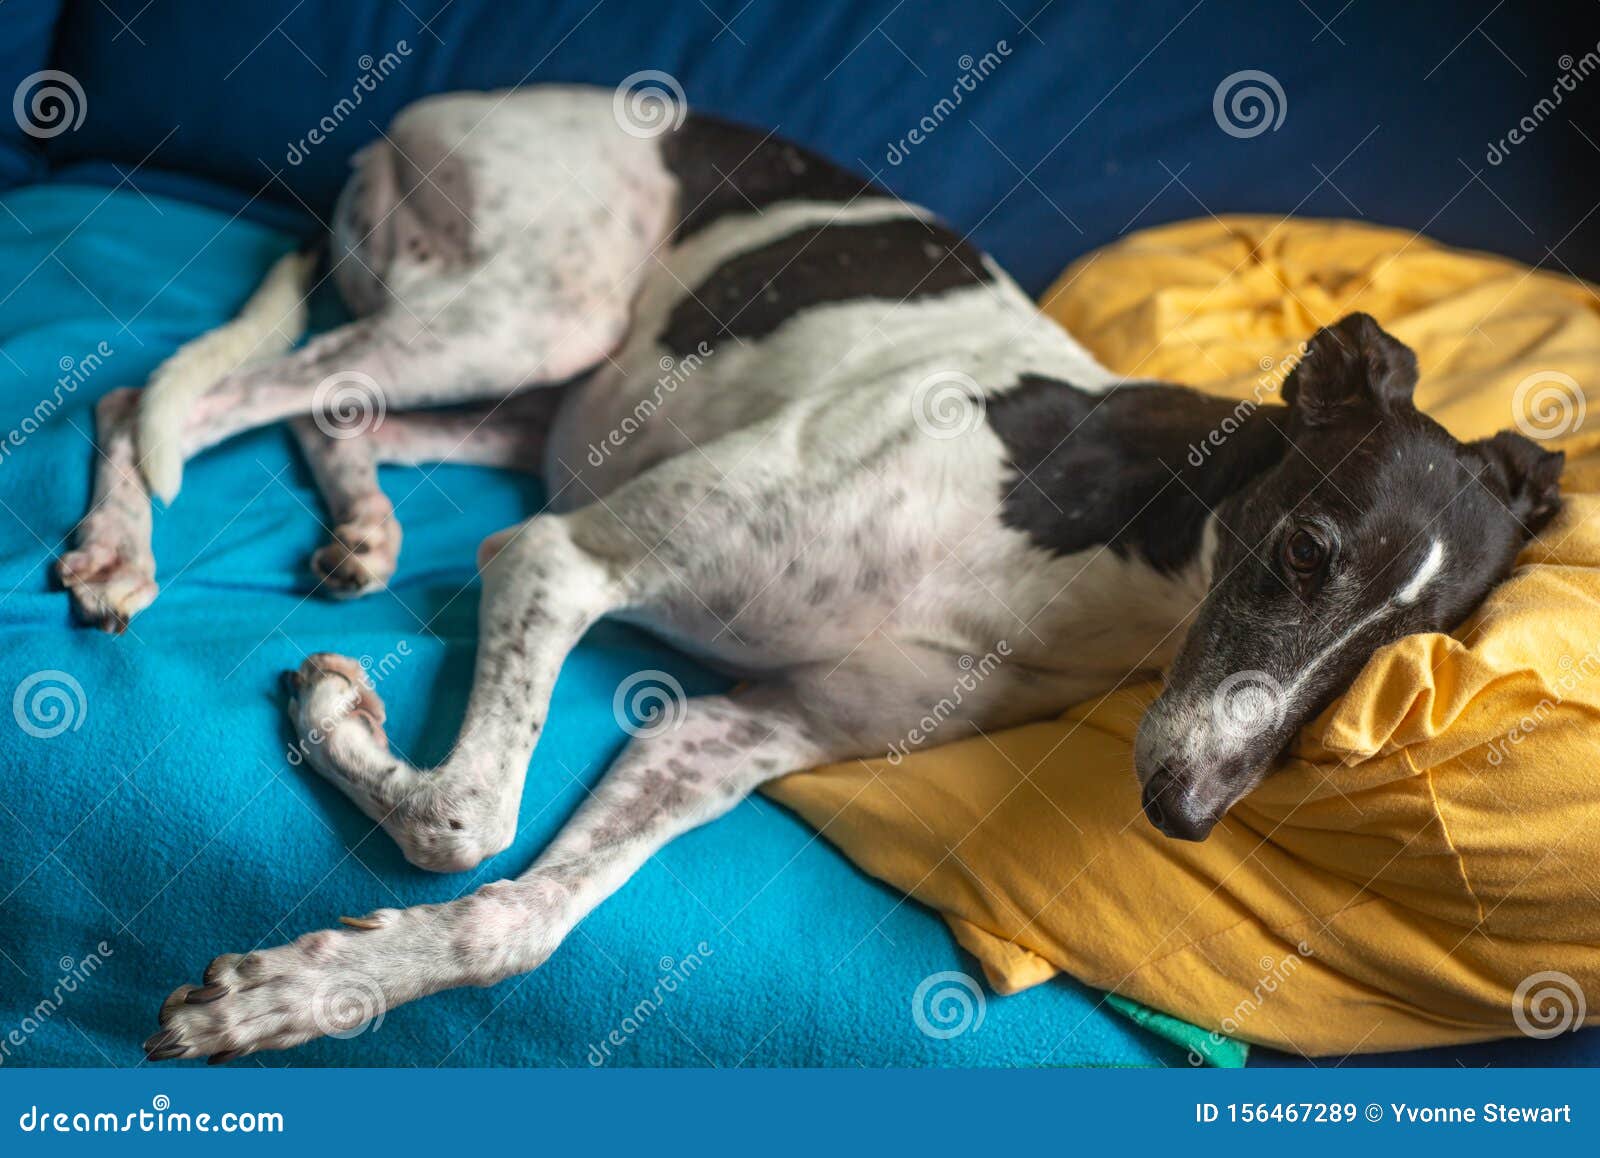 Black And White Greyhound Lying On A Sofa With A Pillow Under Its Head Stock Image Image Of Domestic Gray 156467289